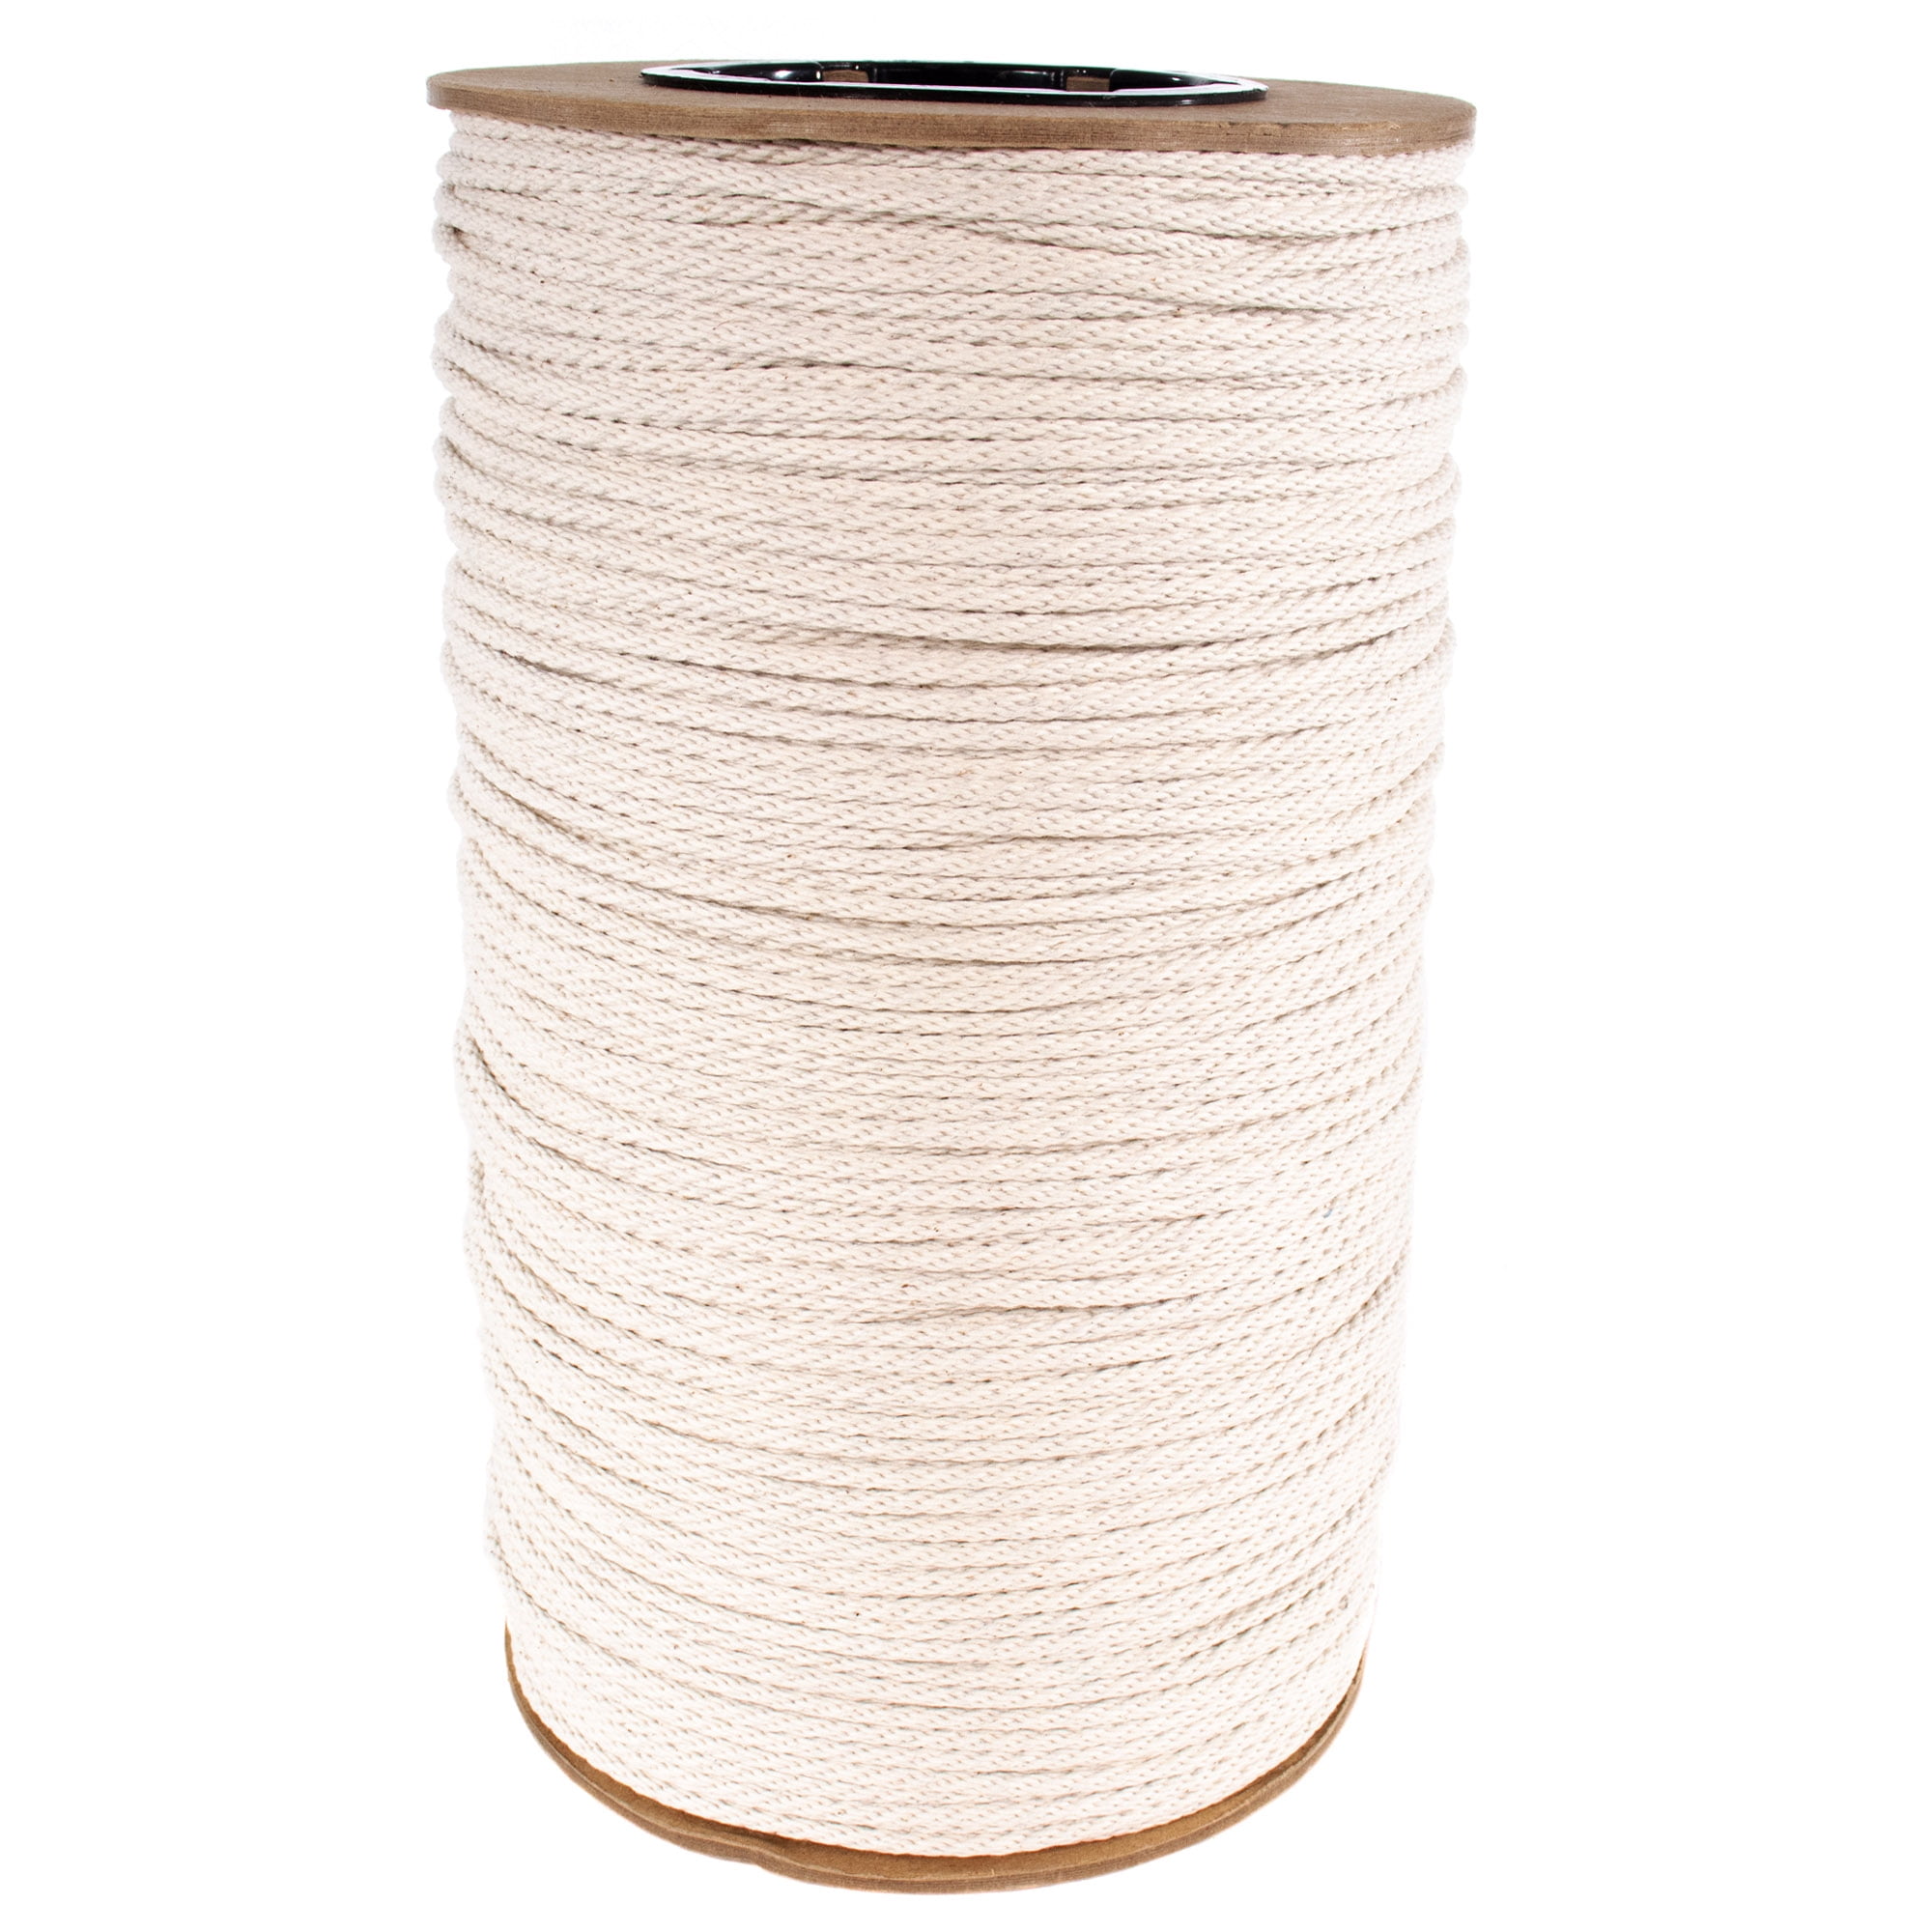 OAVQHLG3B Macrame Cord 4mm x 328Yards,Natural Cotton Macrame Rope,3 Strand  Twisted Cotton Cord for Wall Hanging,Plant Hangers,Crafts,Knitting,  Decorative Projects,Soft Undyed Cotton Rope 